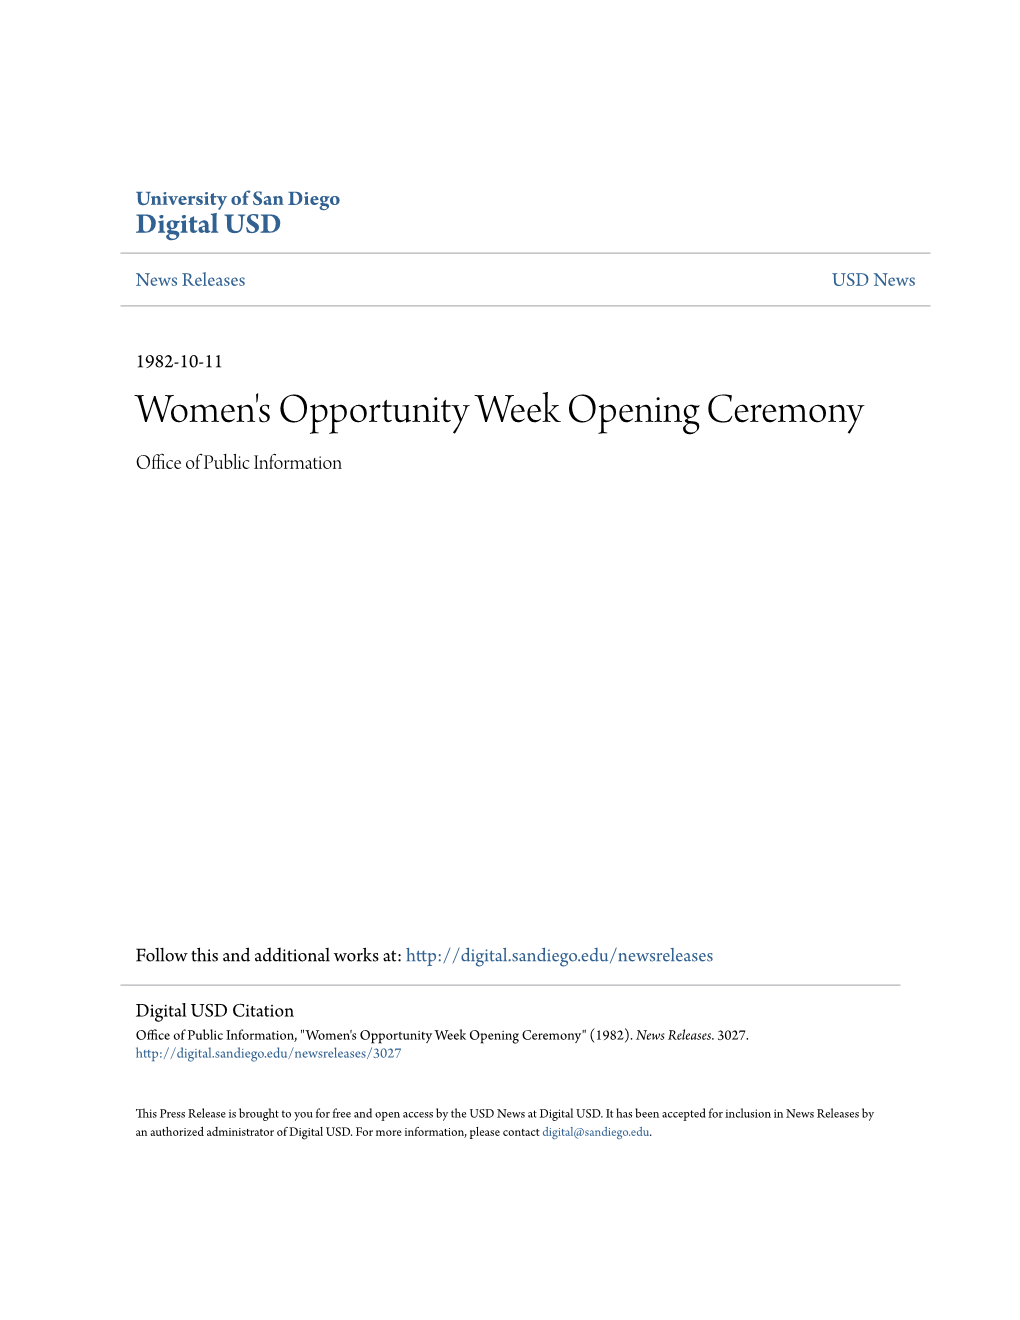 Women's Opportunity Week Opening Ceremony Office of Publicnfor I Mation